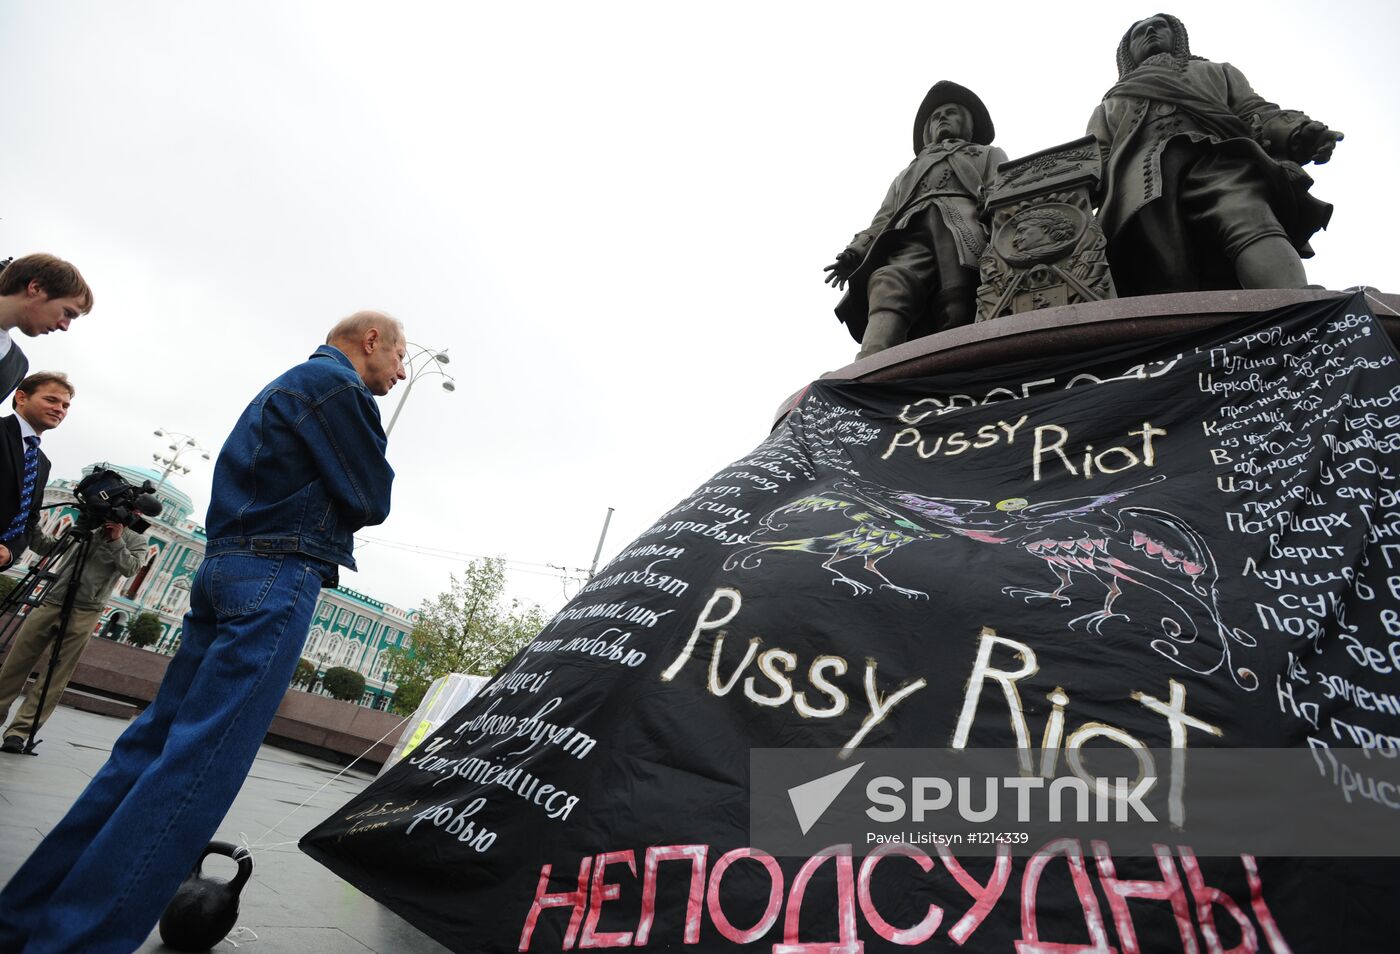 Actions in support of Pussy Riot in Yekaterinburg